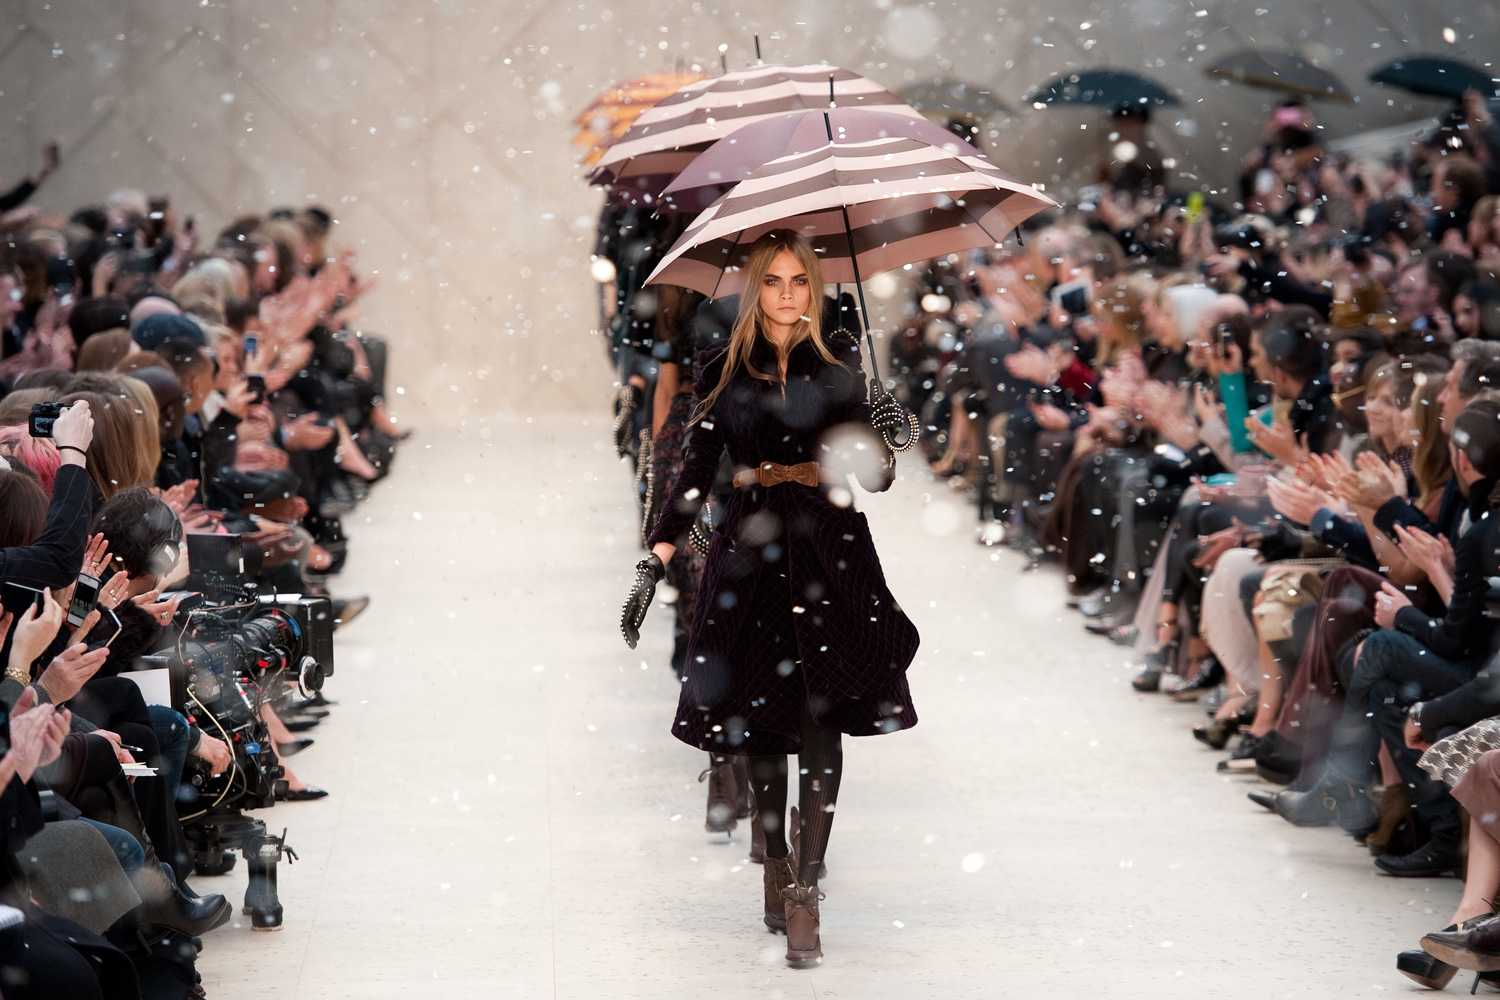 Feb. 20, 2012. Models carry umbrellas through plastic  rain  during the finale of the Burberry Prorsum London 2012 Autumn/Winter collection catwalk show at London Fashion Week in central London.